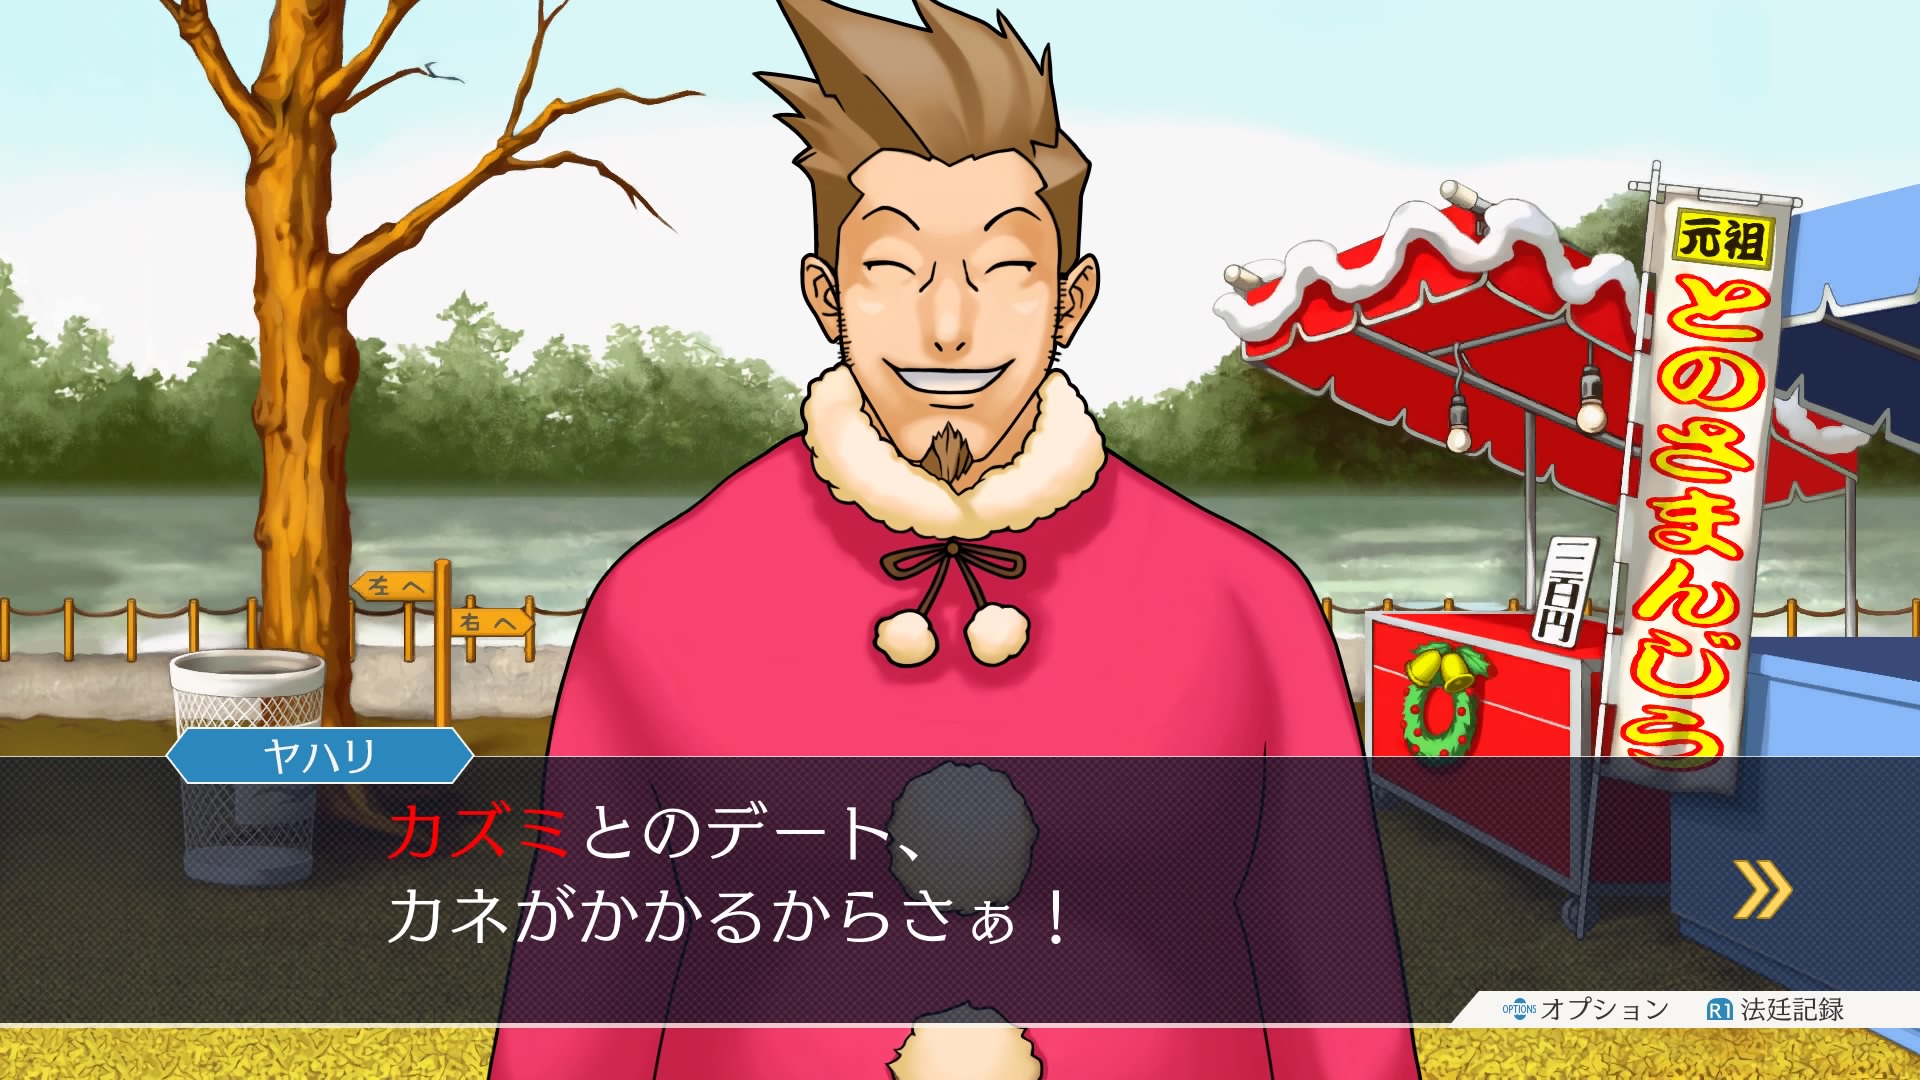 Phoenix Wright: Ace Attorney Trilogy – new Pearl Fey and Larry Butz screenshots ...